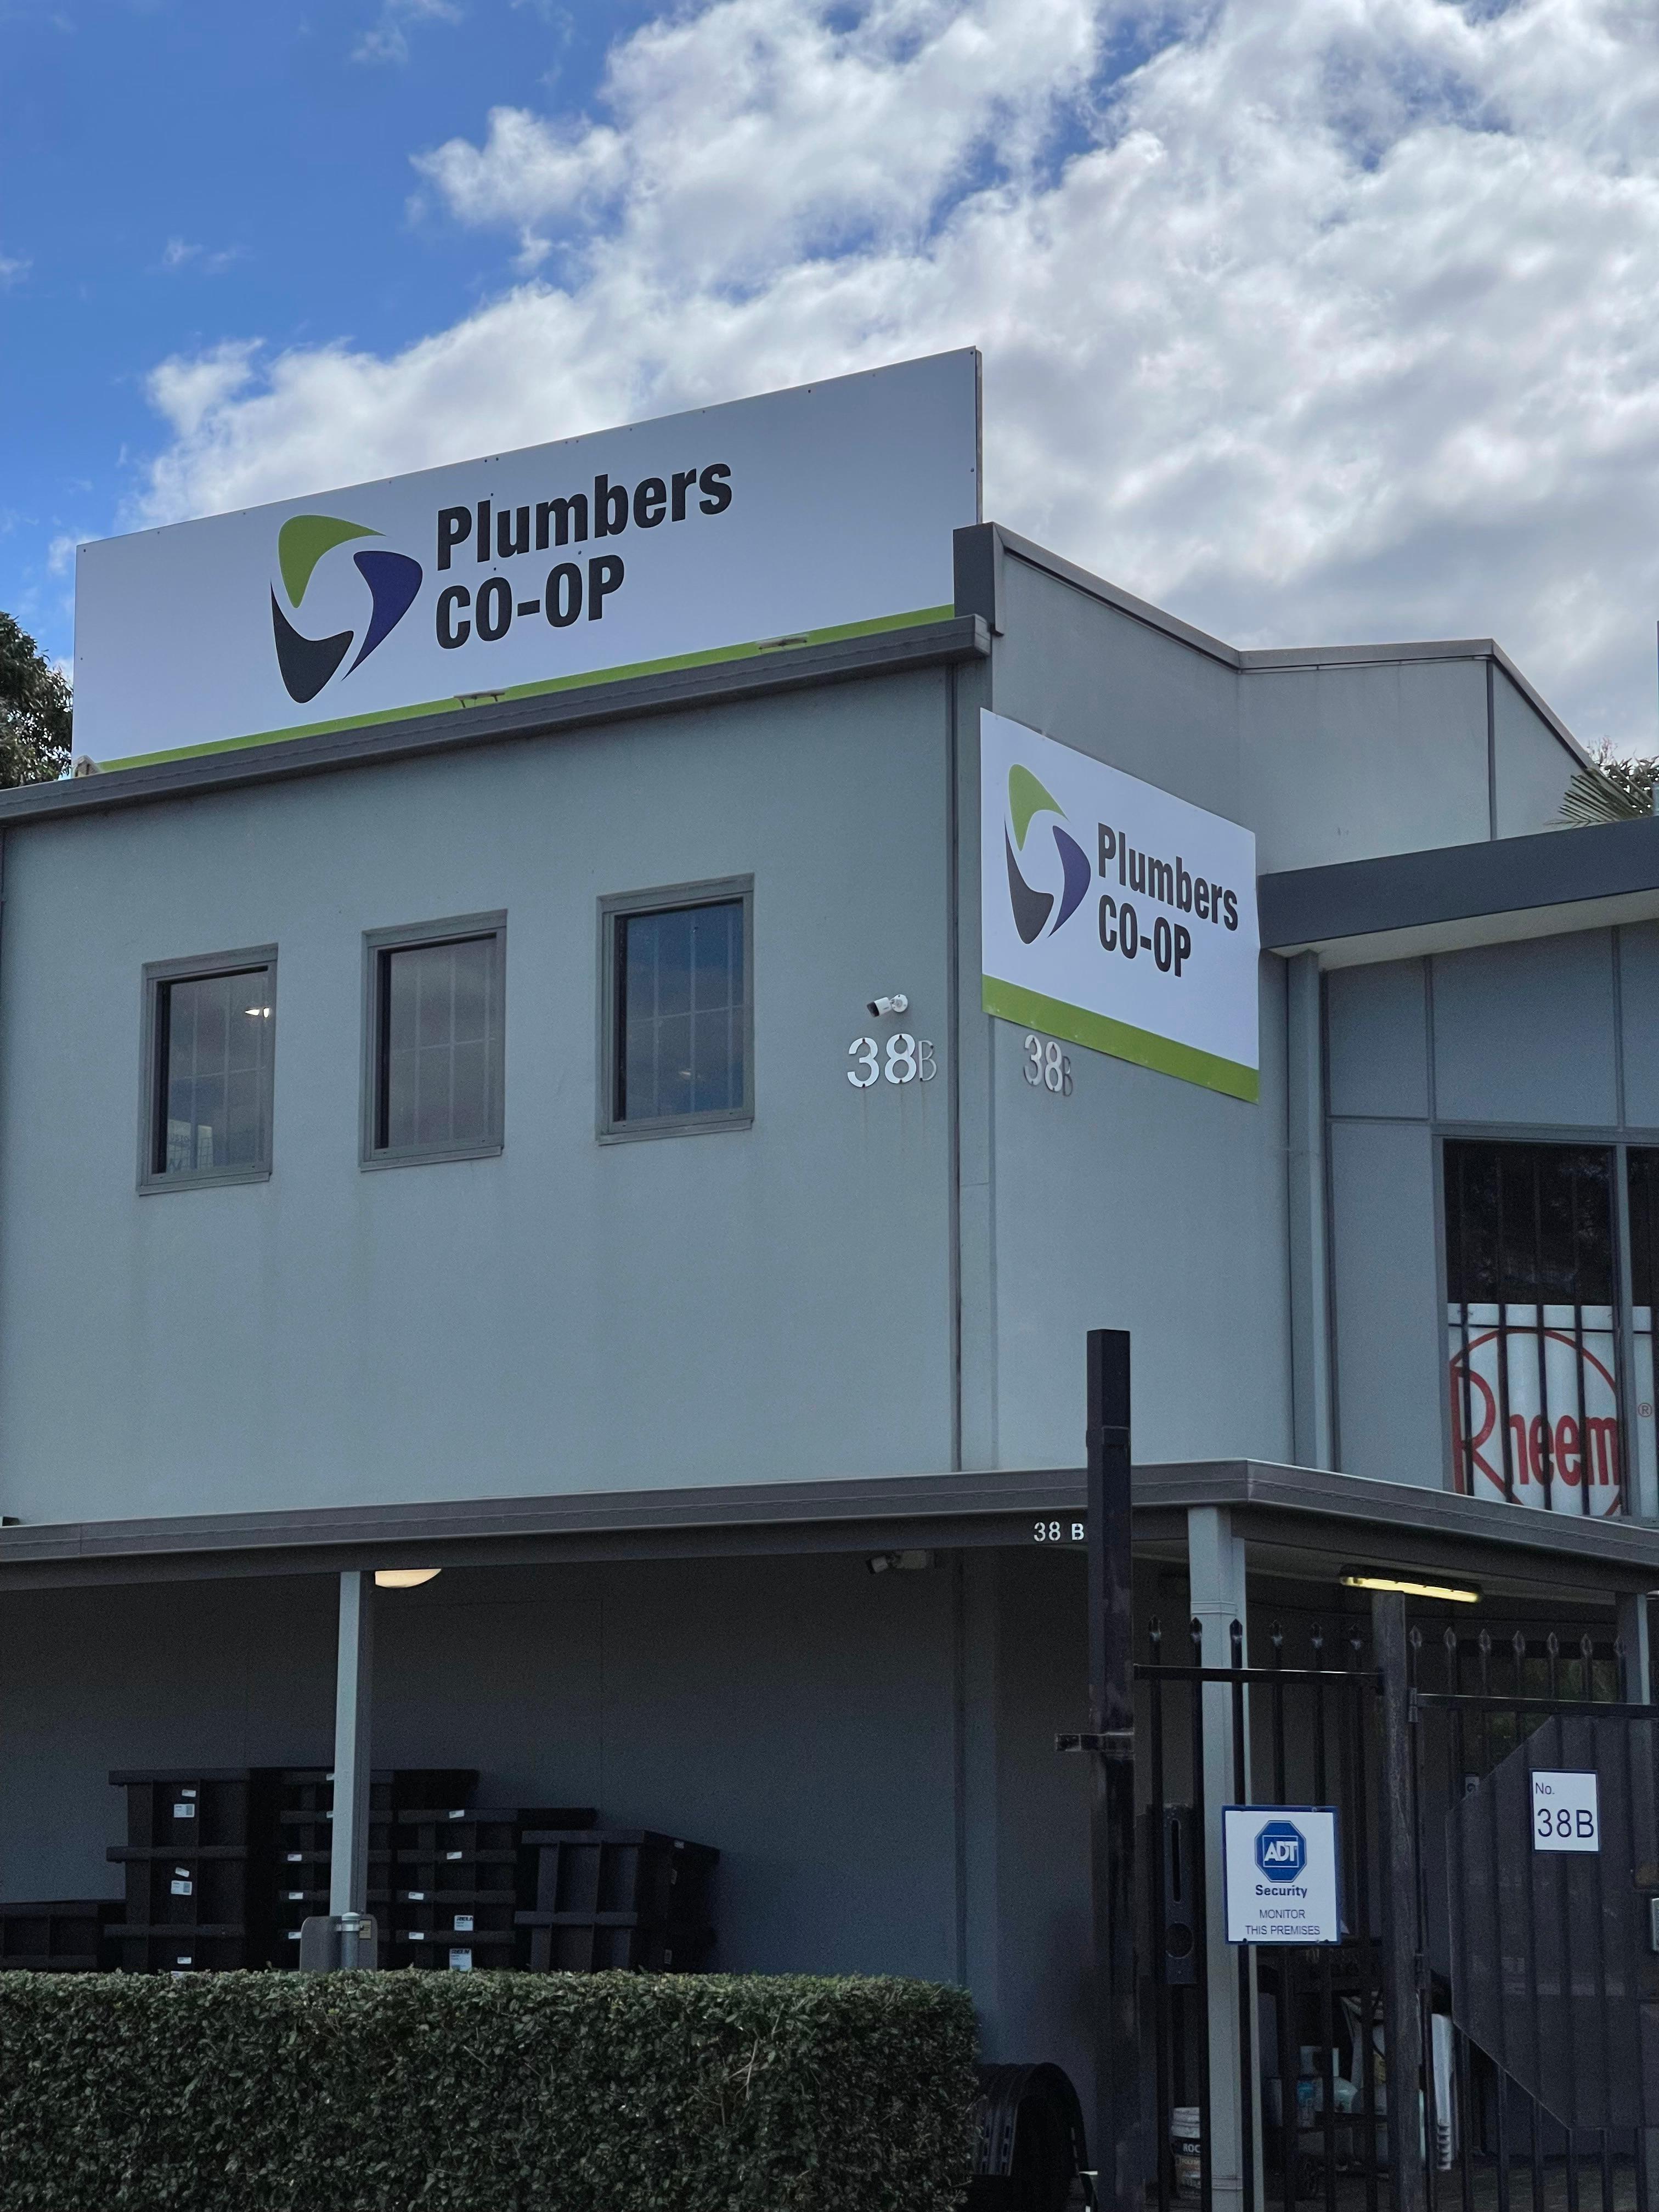 Plumbers' Co-op Shellharbour